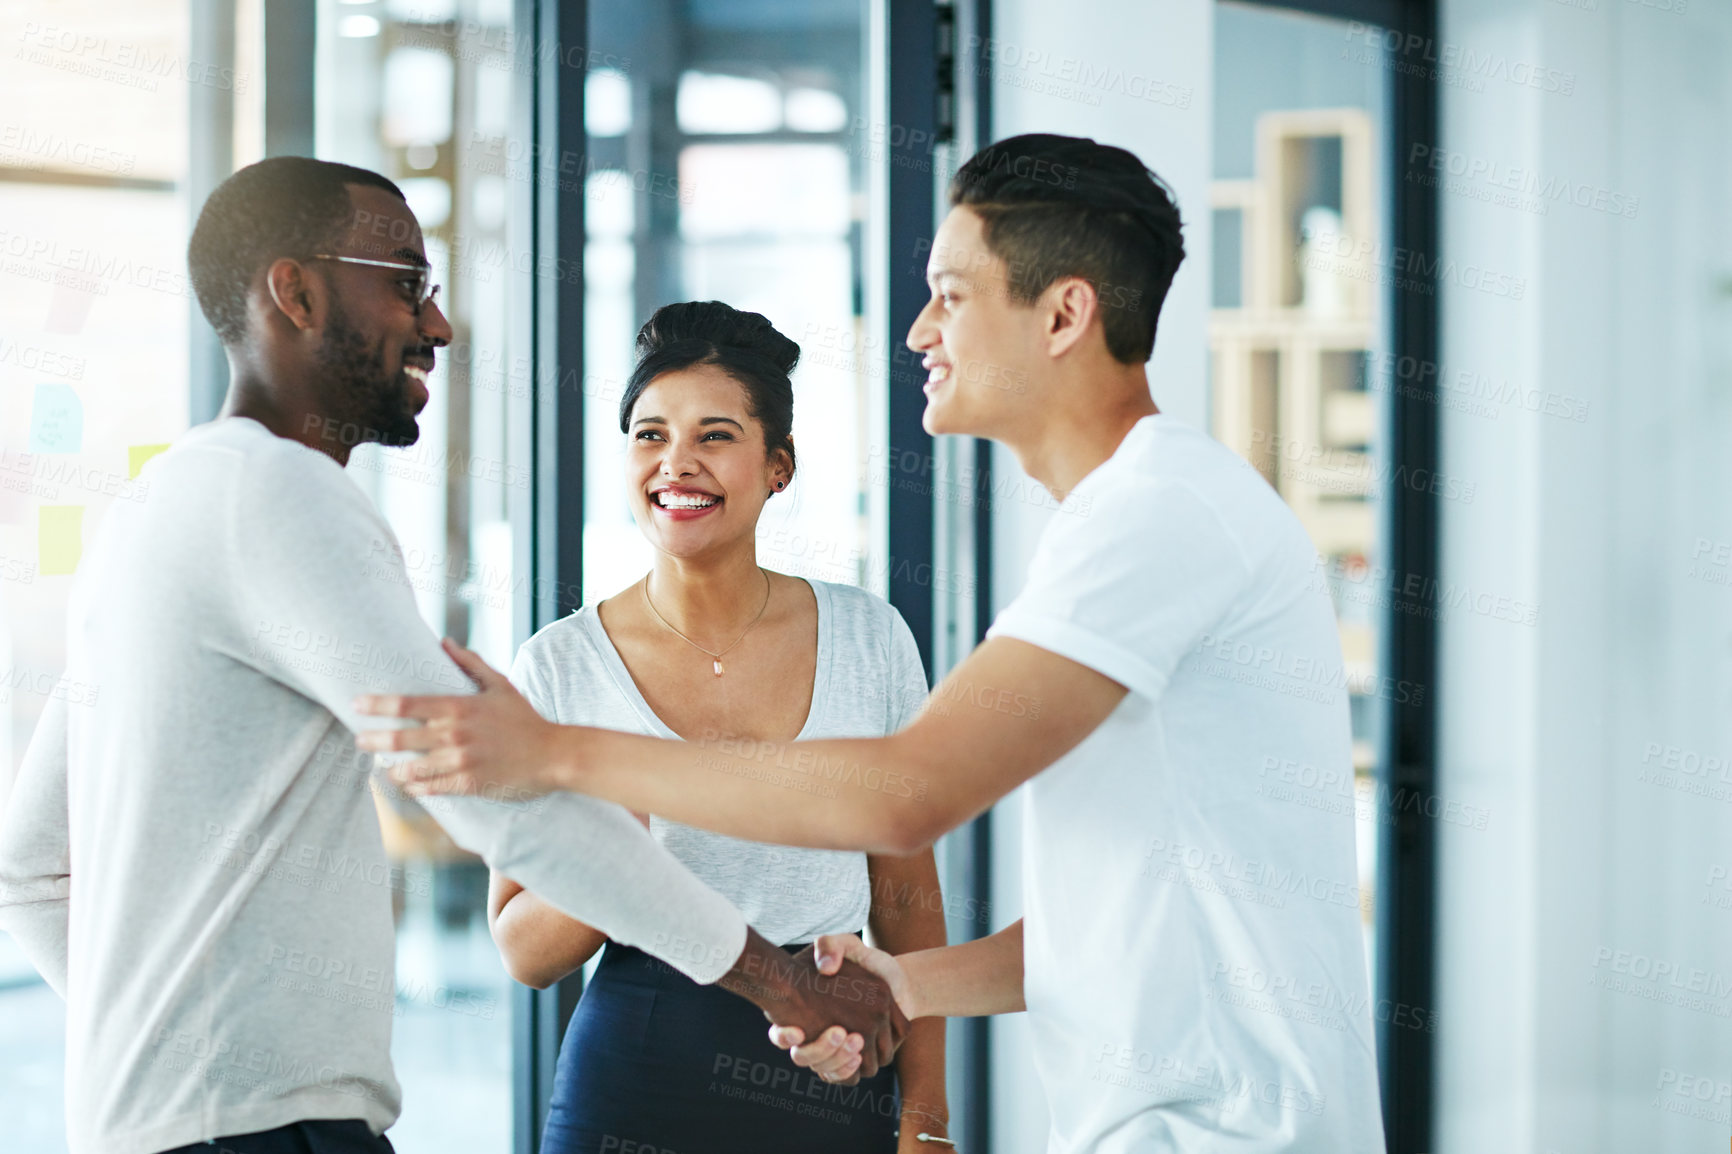 Buy stock photo Handshake, teamwork and agreement of business people greeting in an office or working together. Group or team of young colleagues talking, smiling and happy about success, a deal or promotion at work